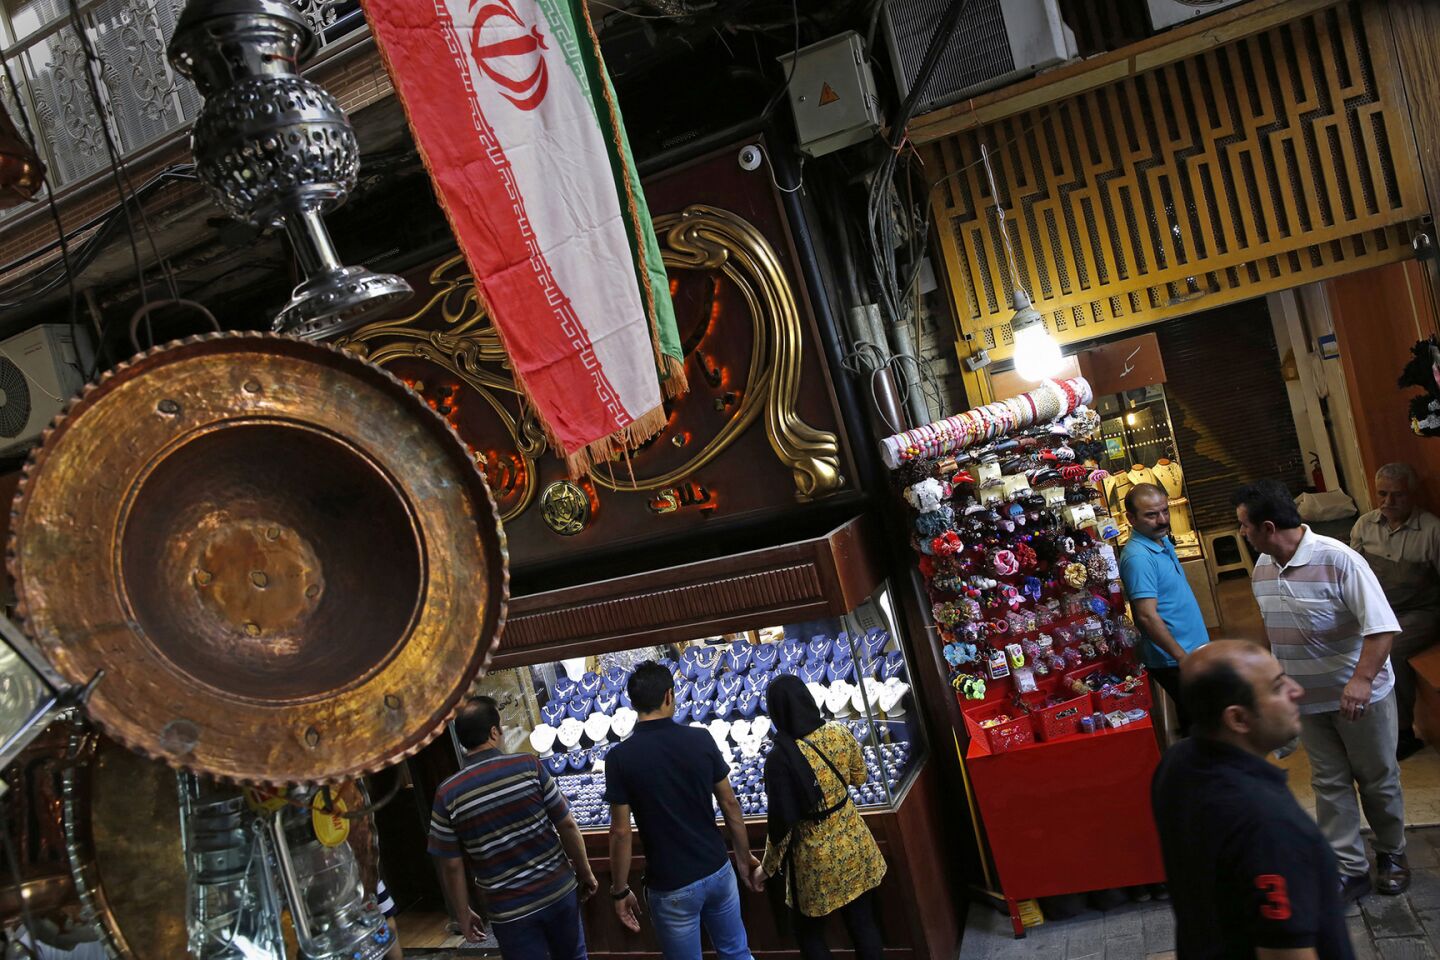 After the sanctions are lifted, Iranians still waiting for change